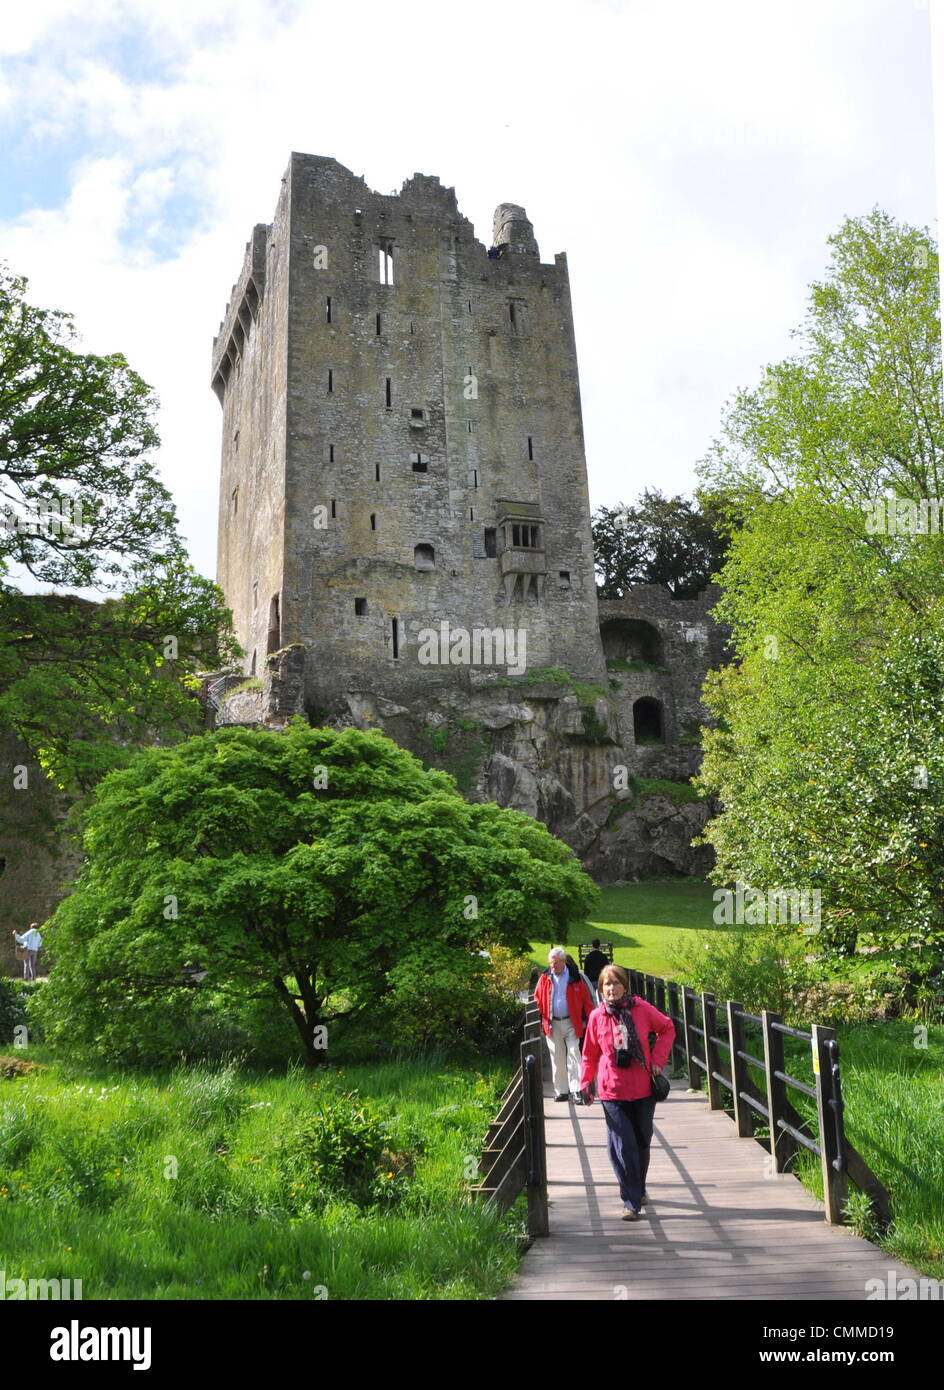 Blarney Castle is a medieval stronghold situated about eight kilometres northwest of Cork, photo taken May 26, 2013. The historic castle is famous for a stone which is set in the wall below the battlements. It is said to bestow the power of eloquence upon those who kiss it. Blarney Castle and its surrounding gardens and woodland along the River Martin attract lots of visitors from all over the world. Photo: Frank Baumgart Stock Photo